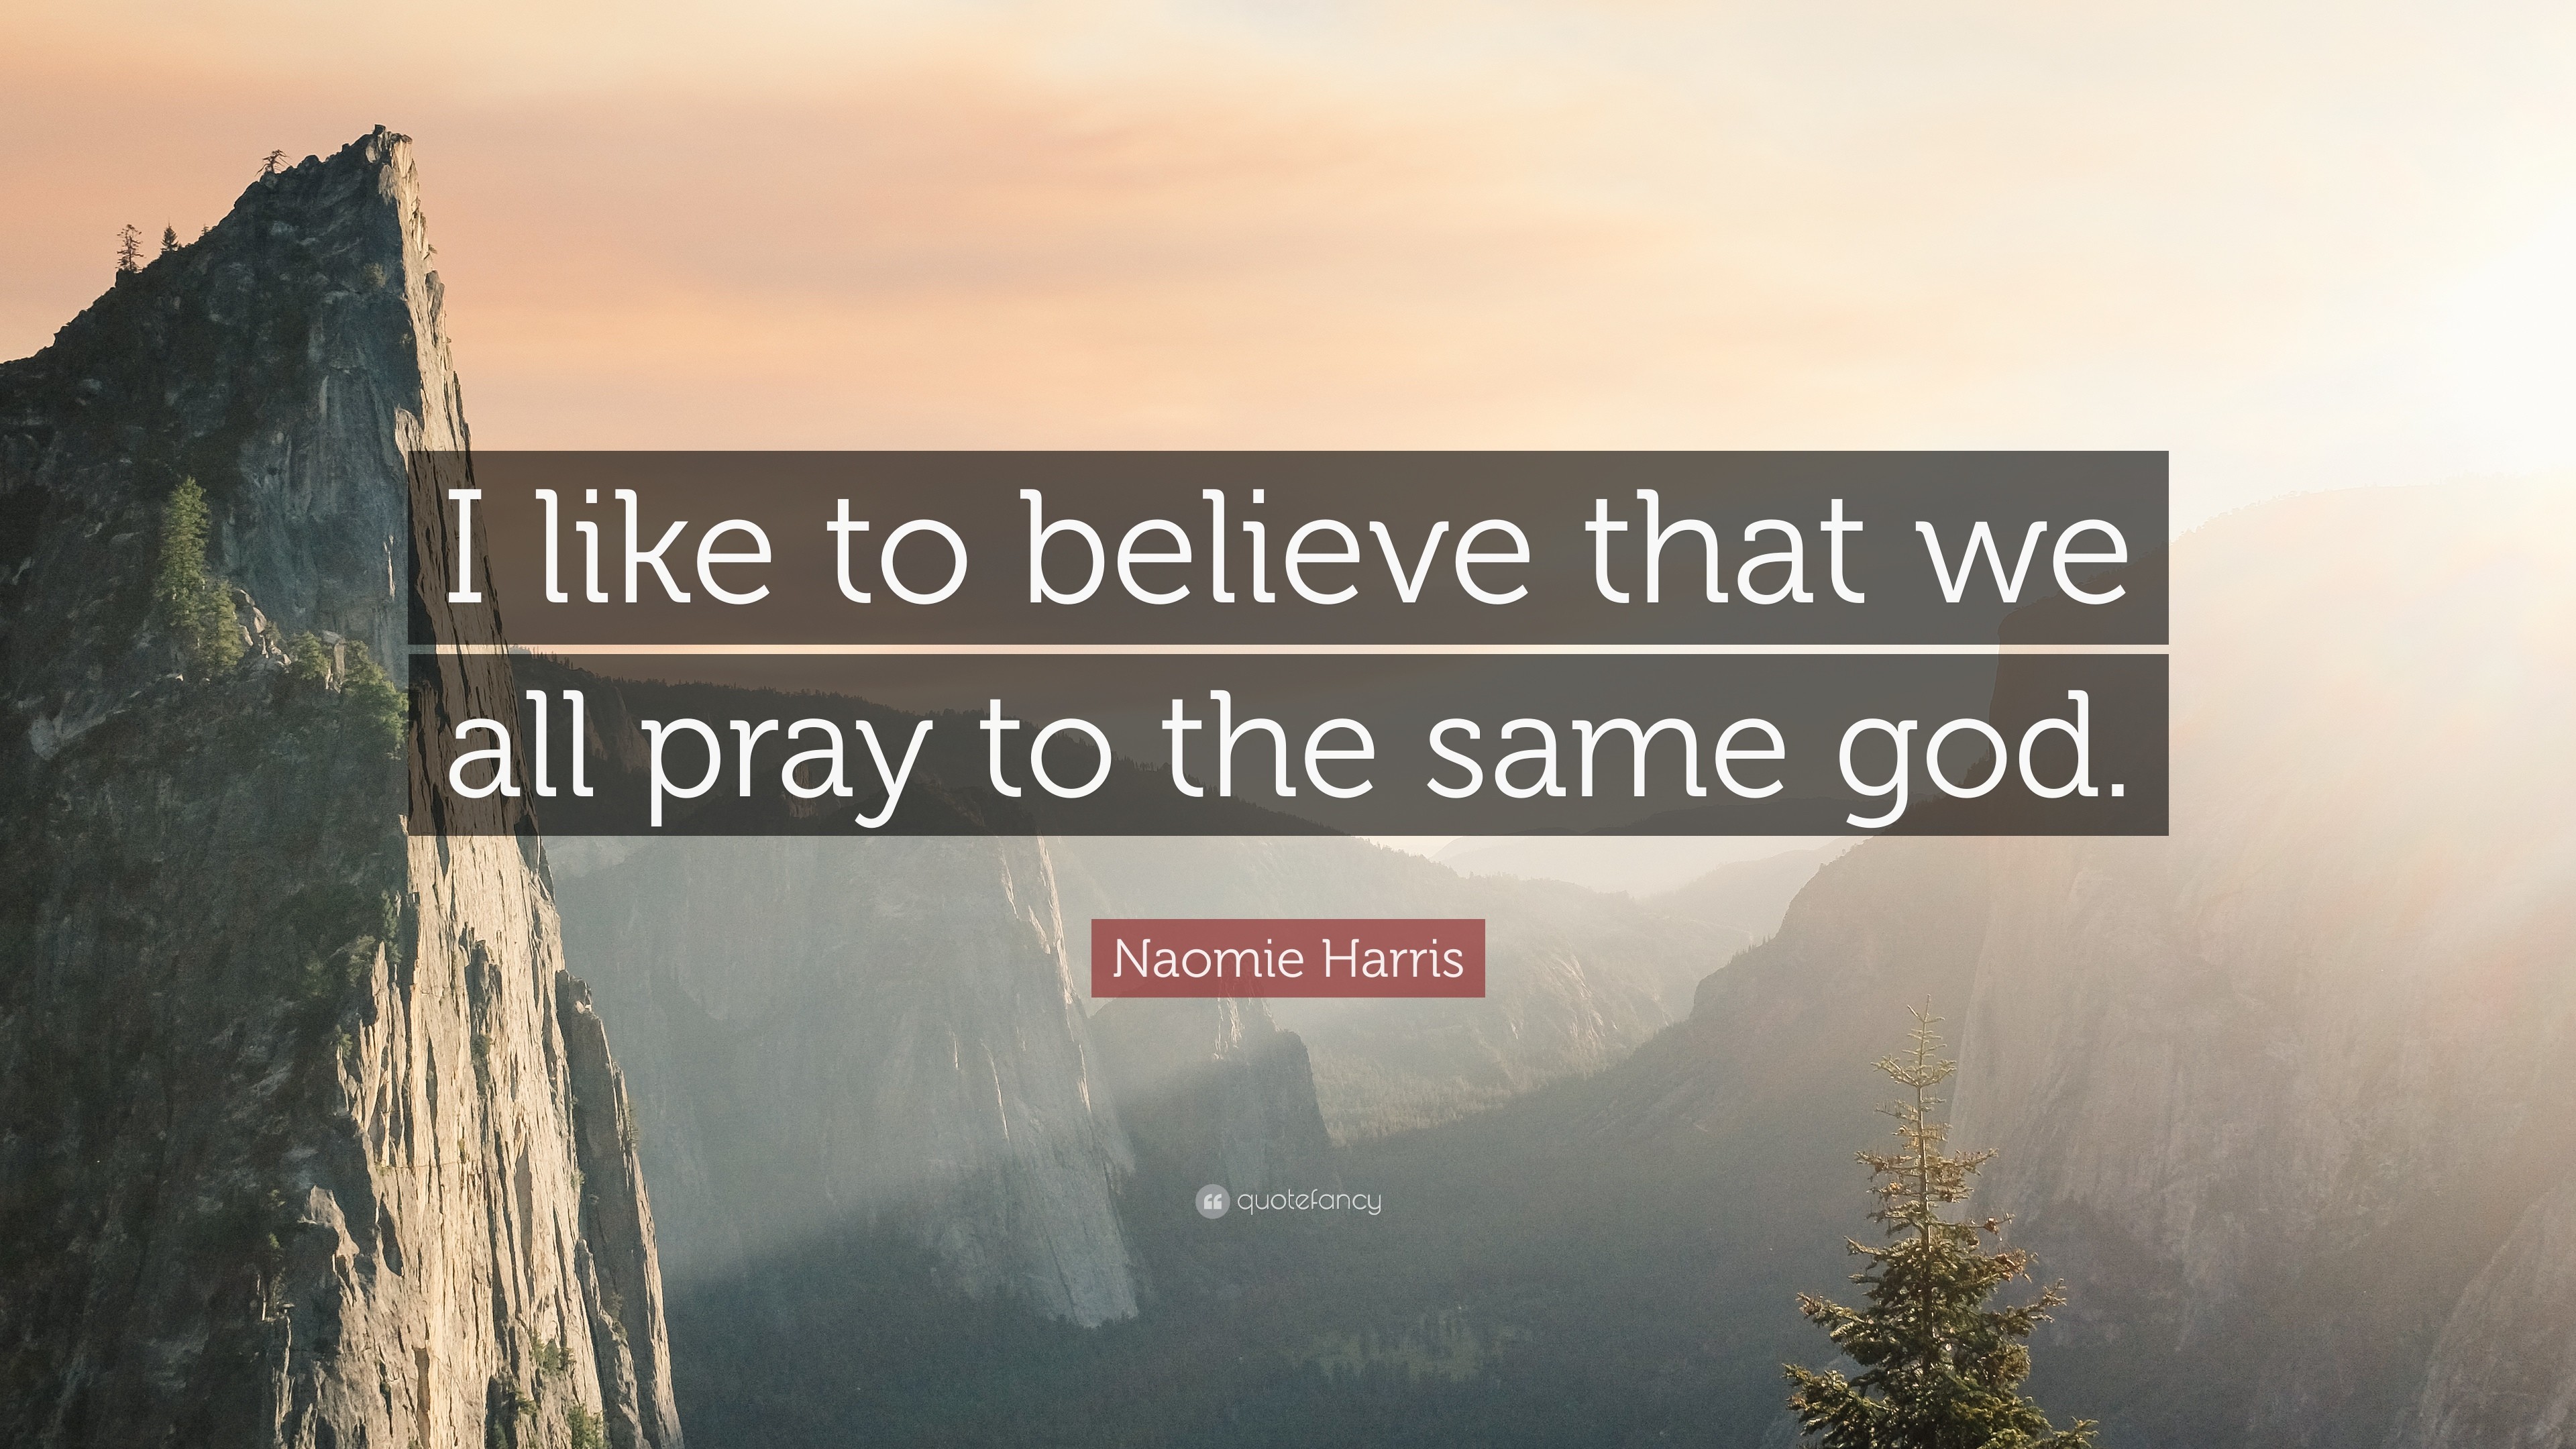 Naomie Harris Quote: "I like to believe that we all pray to the same. 